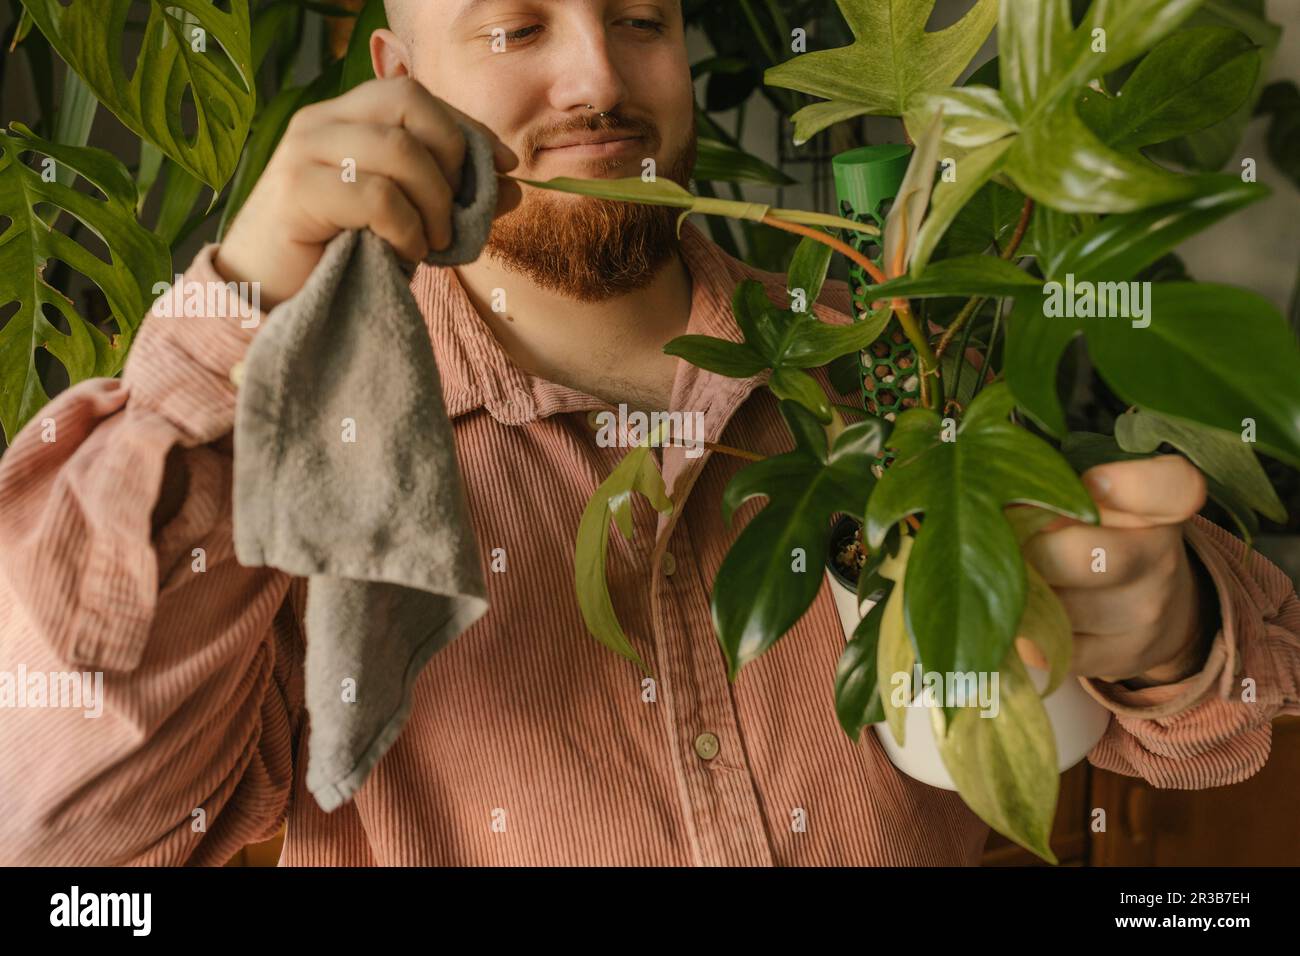 Smiling man cleaning leaves of plants at home Stock Photo